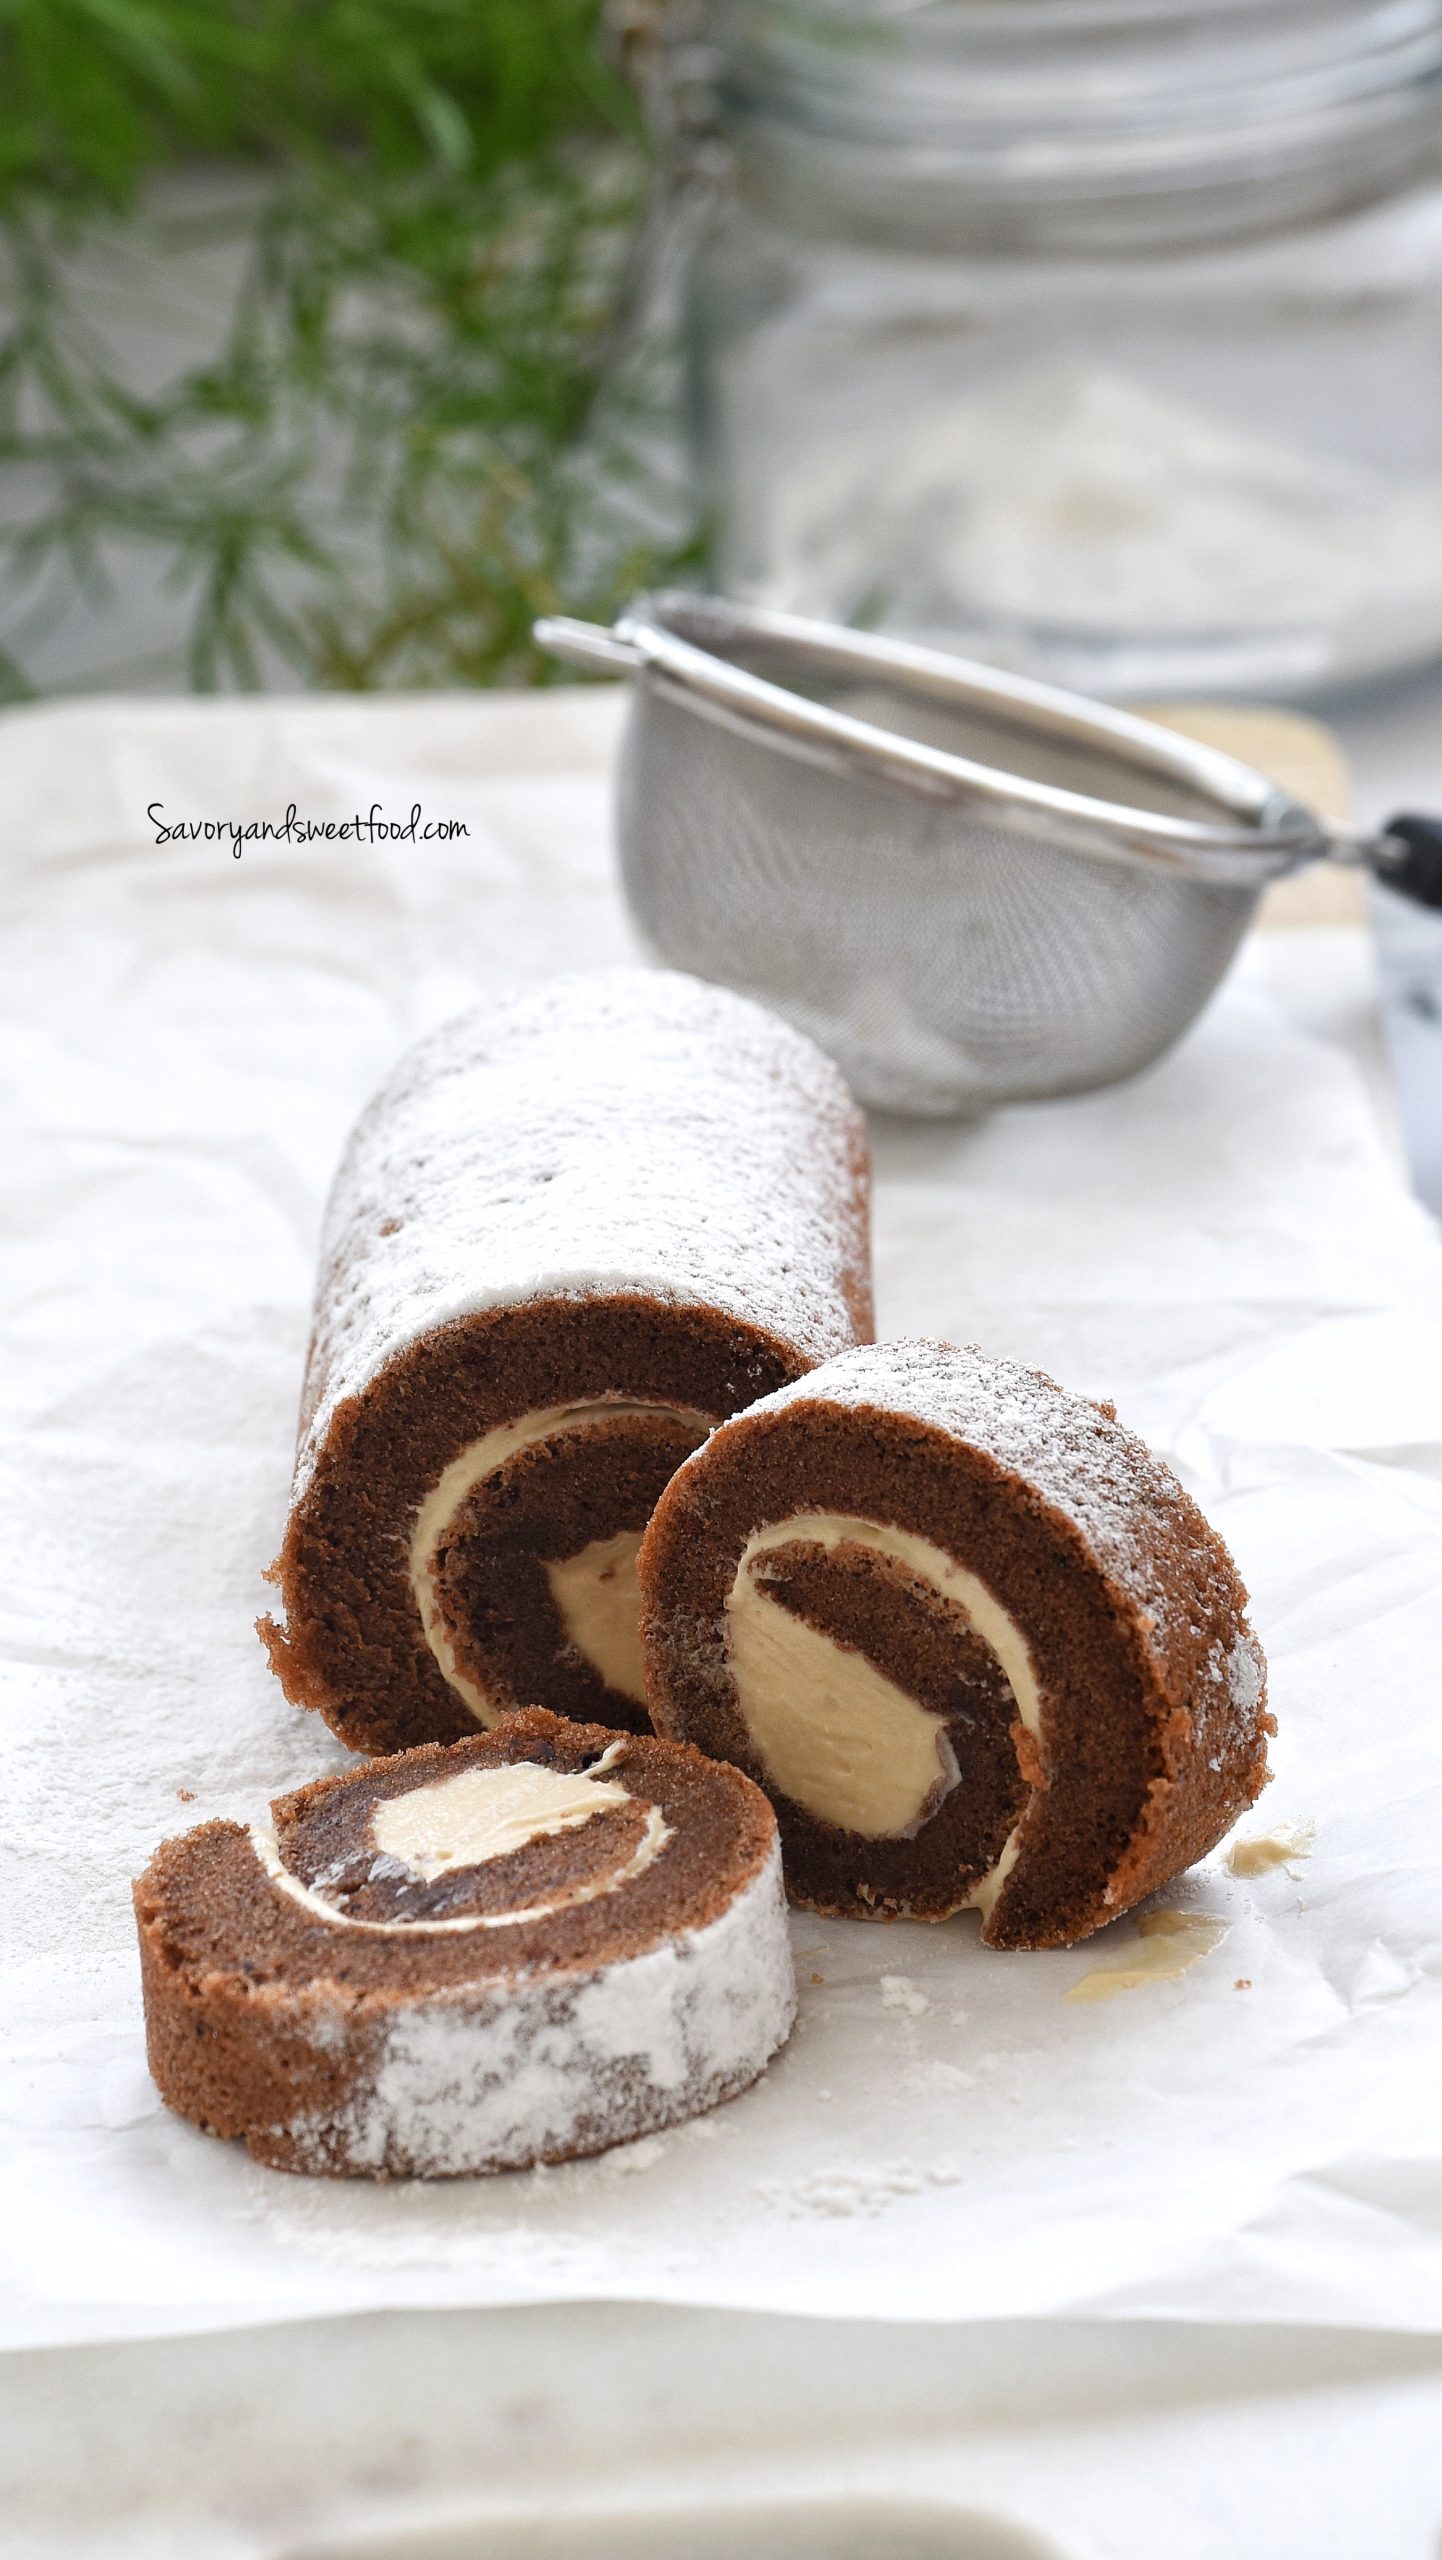 Chocolate Swiss Roll (in pan) with Lotus Pudding Cream